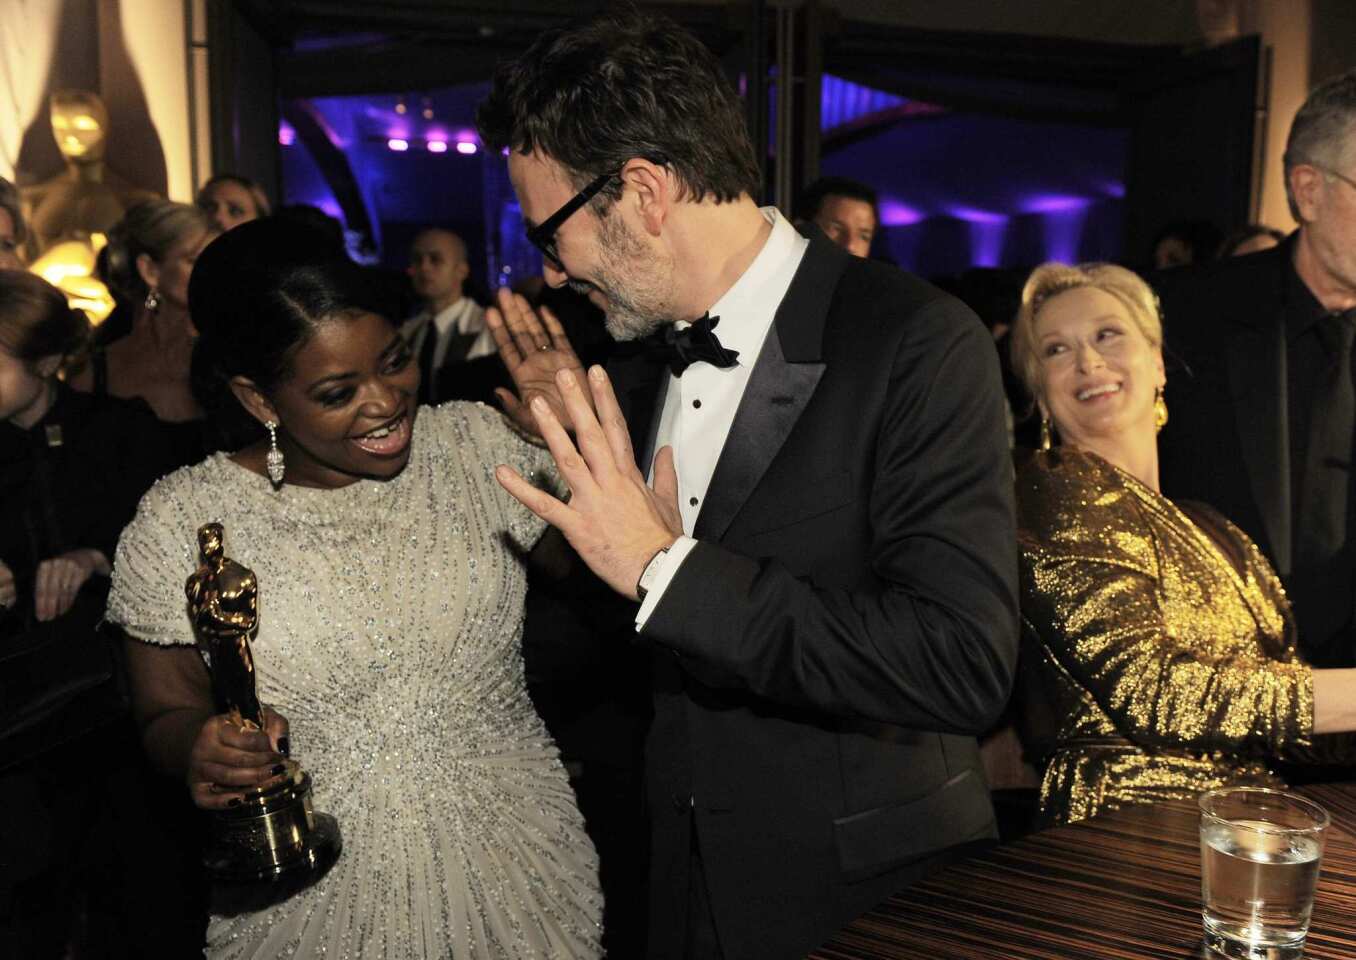 Supporting actress Spencer has a high-five moment with best director Hazanavicius as the lead actress winner, Meryl Streep, enjoys the levity.